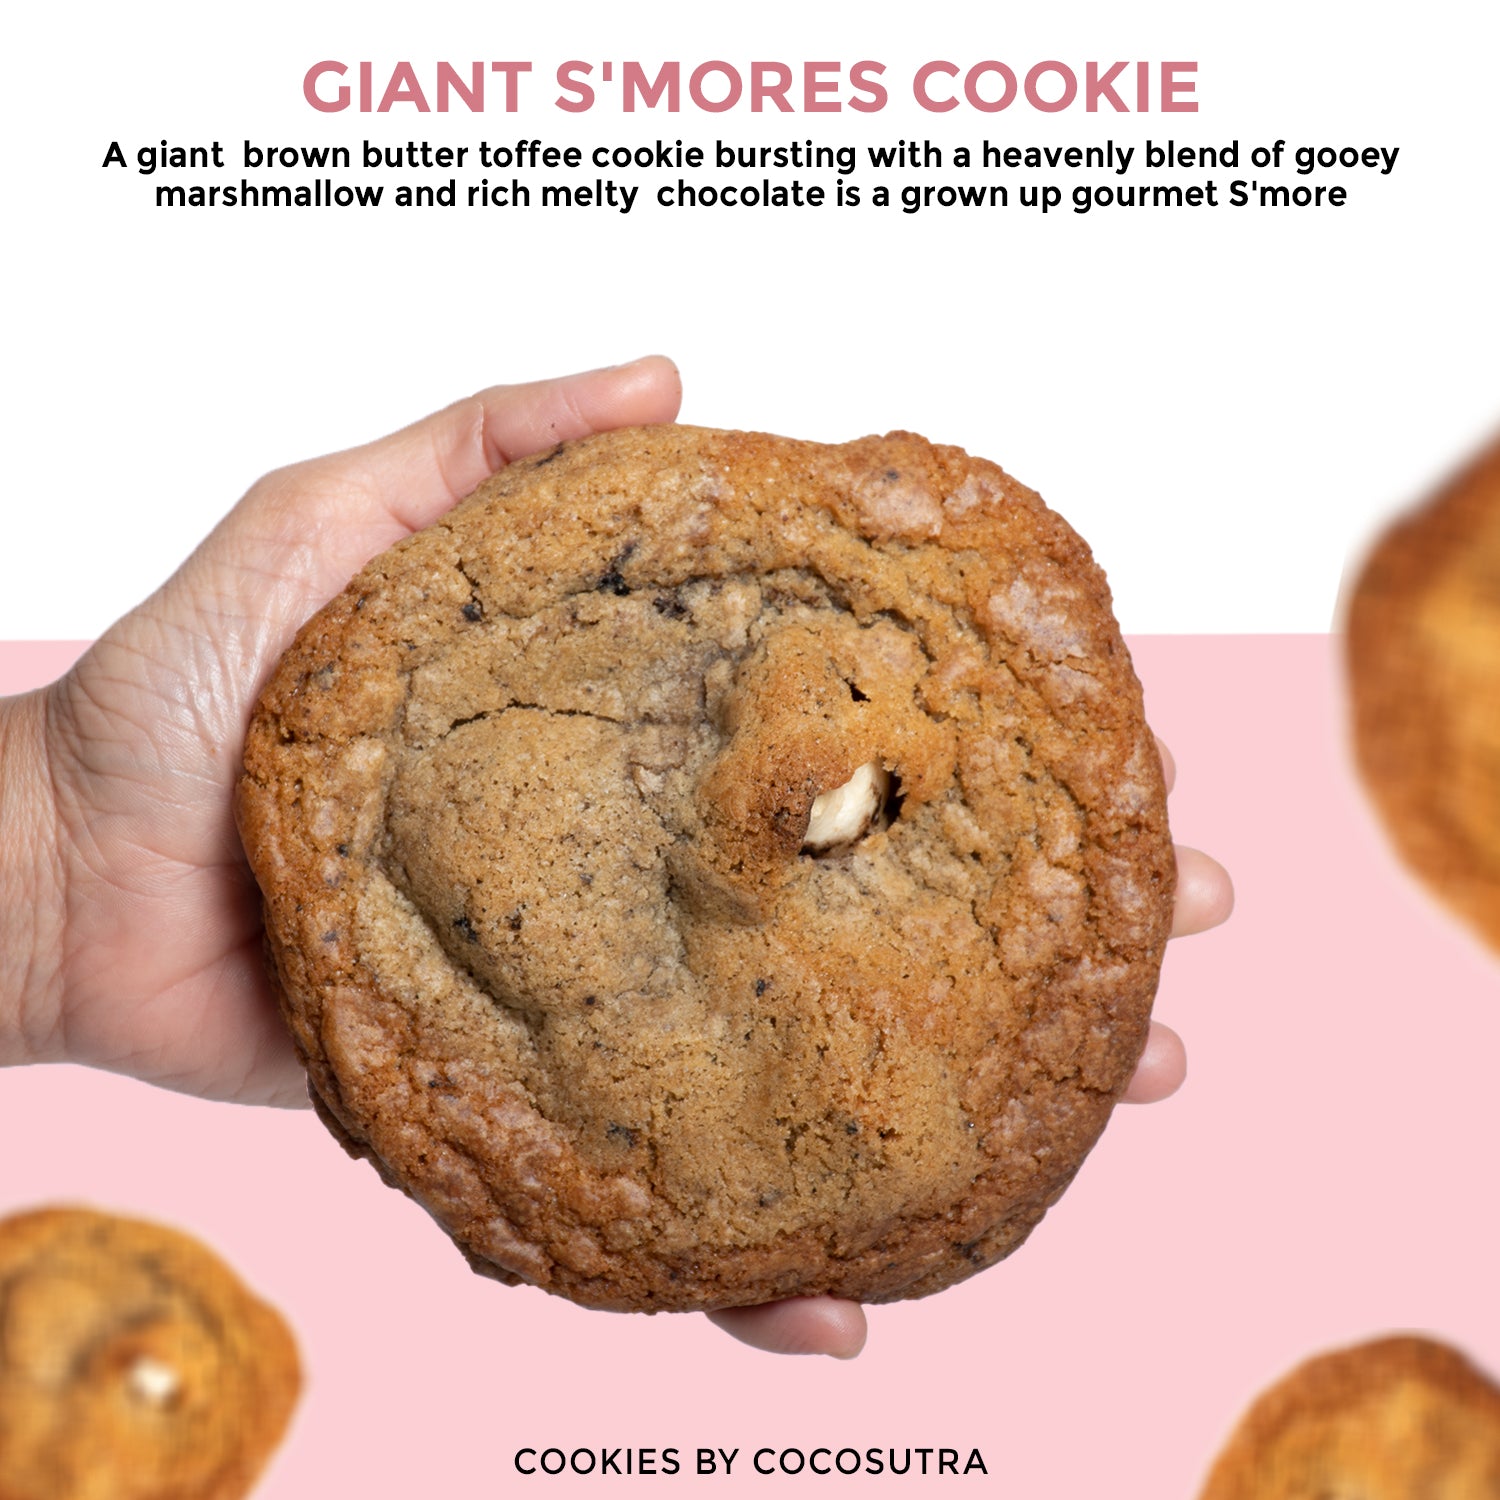 Cocosutra Giant S’mores Cookies